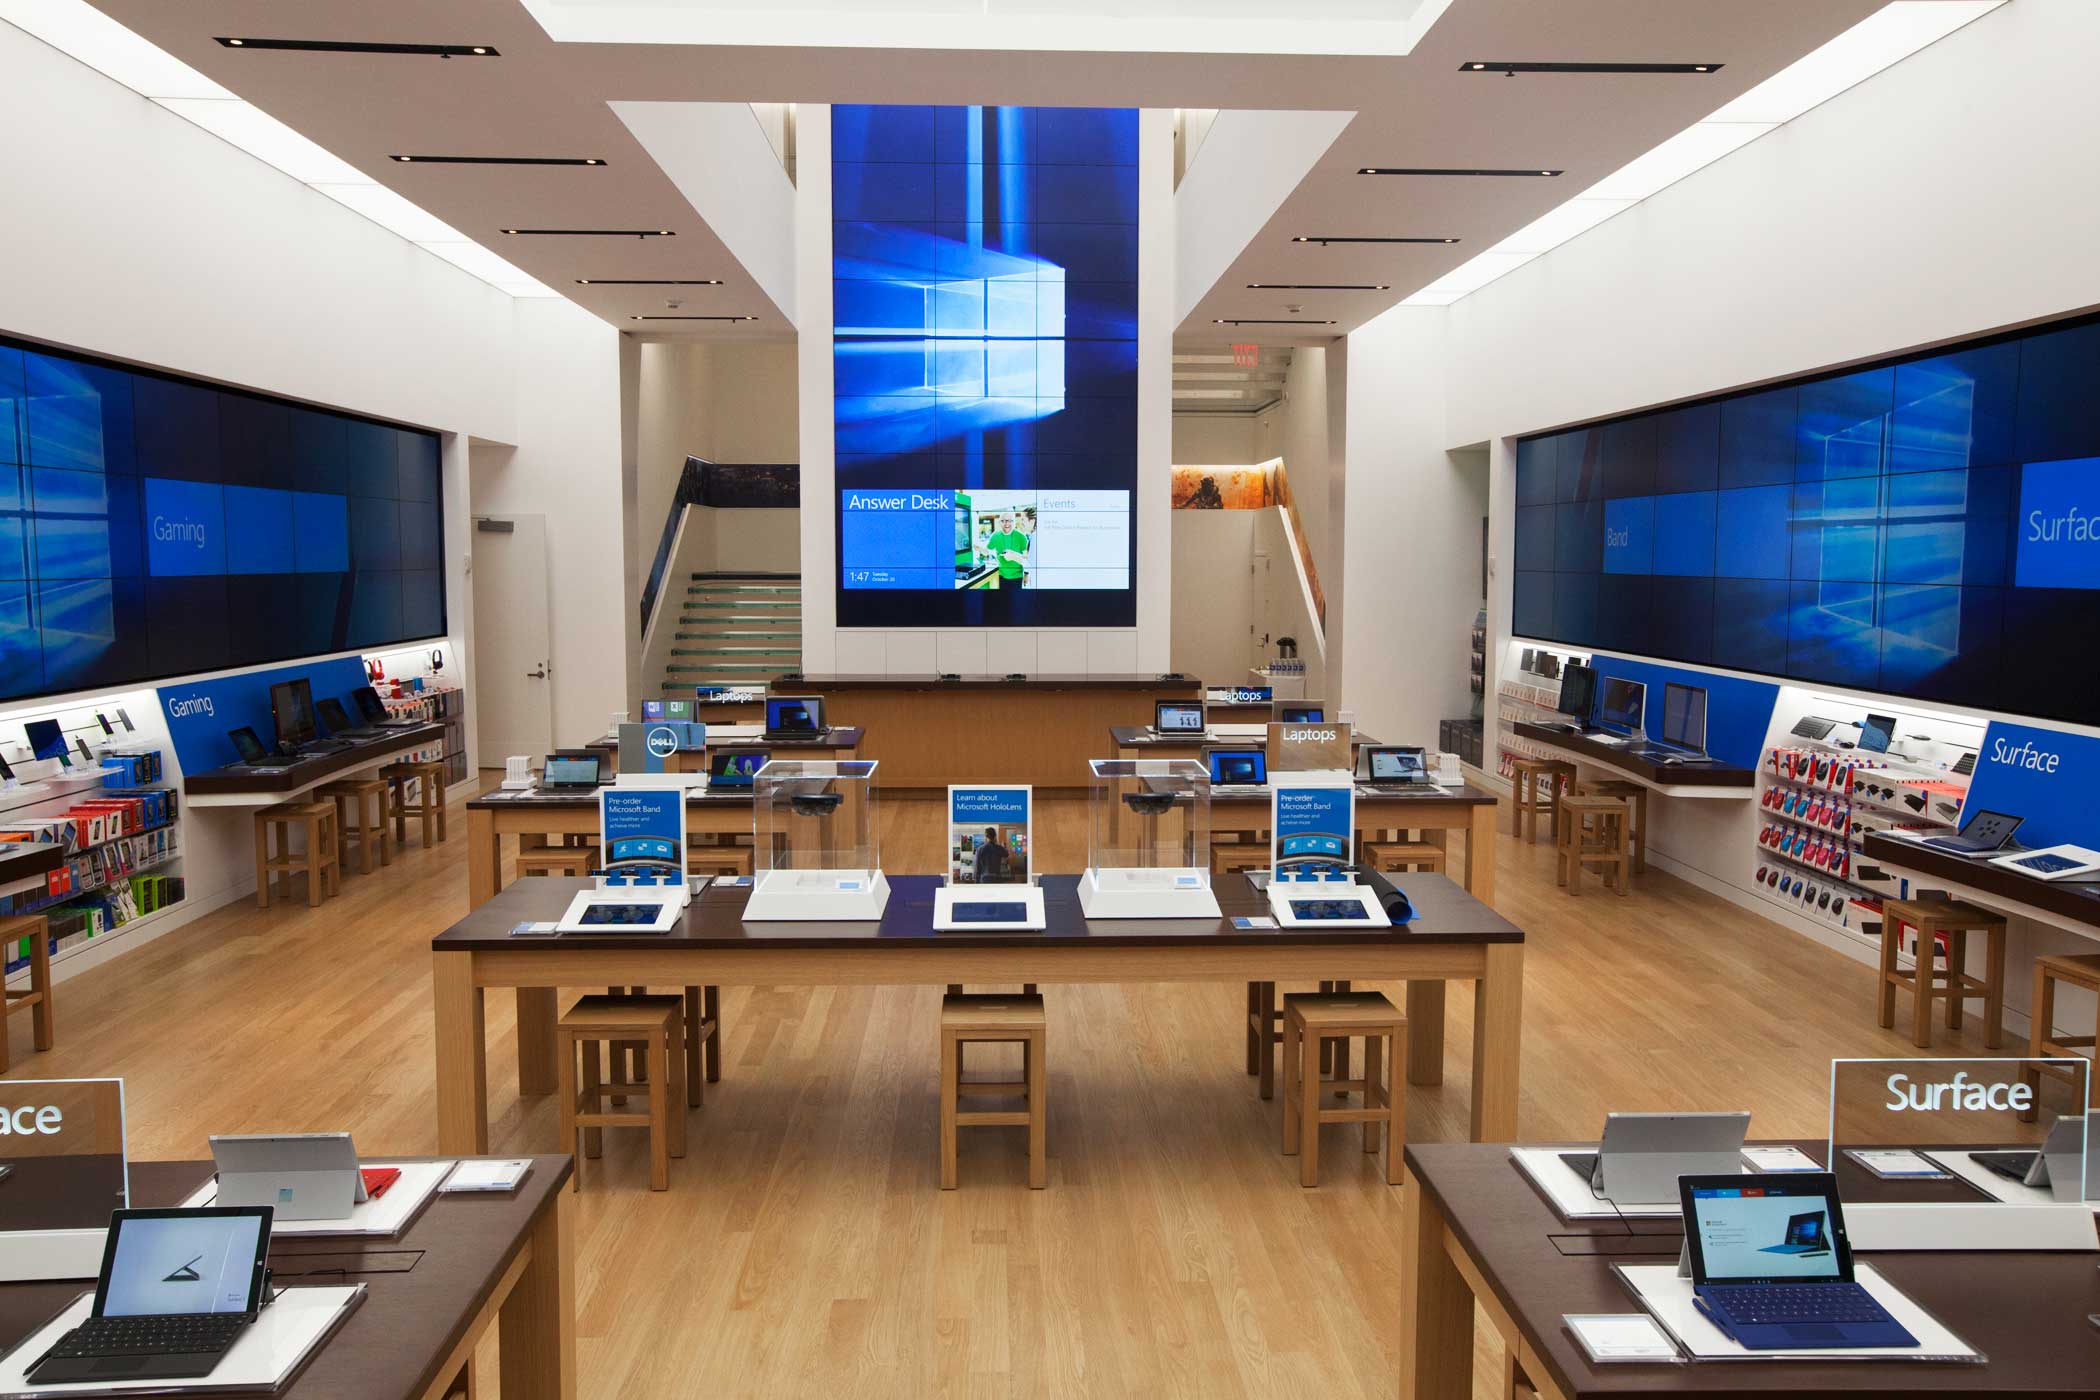 Microsoft's new flagship store opening on Oct. 26, 2015 in New York City.